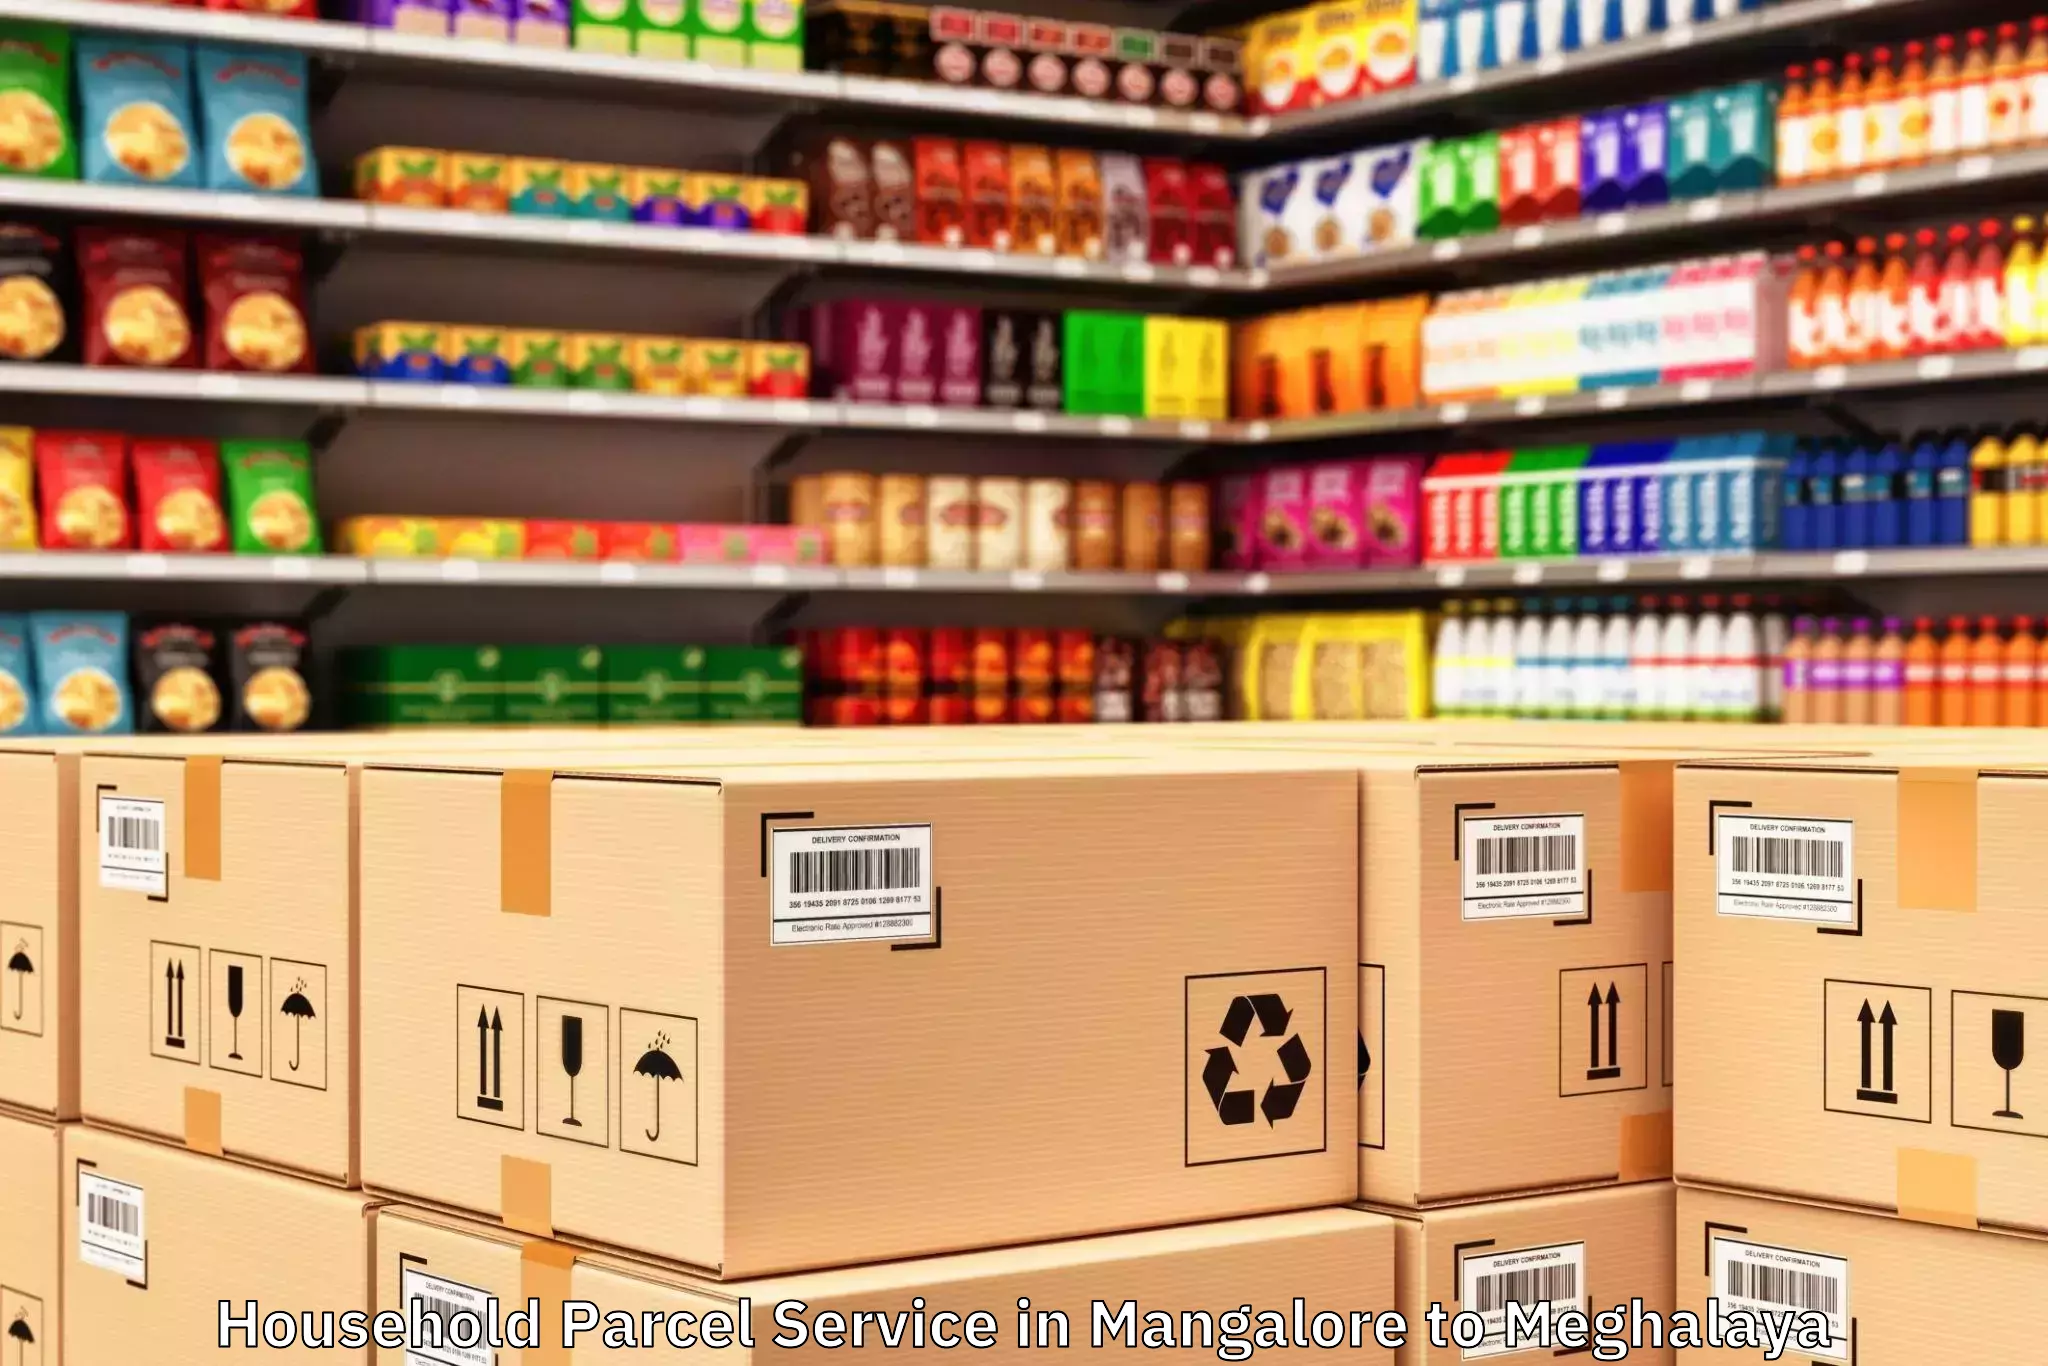 Top Mangalore to Meghalaya Household Parcel Service Available